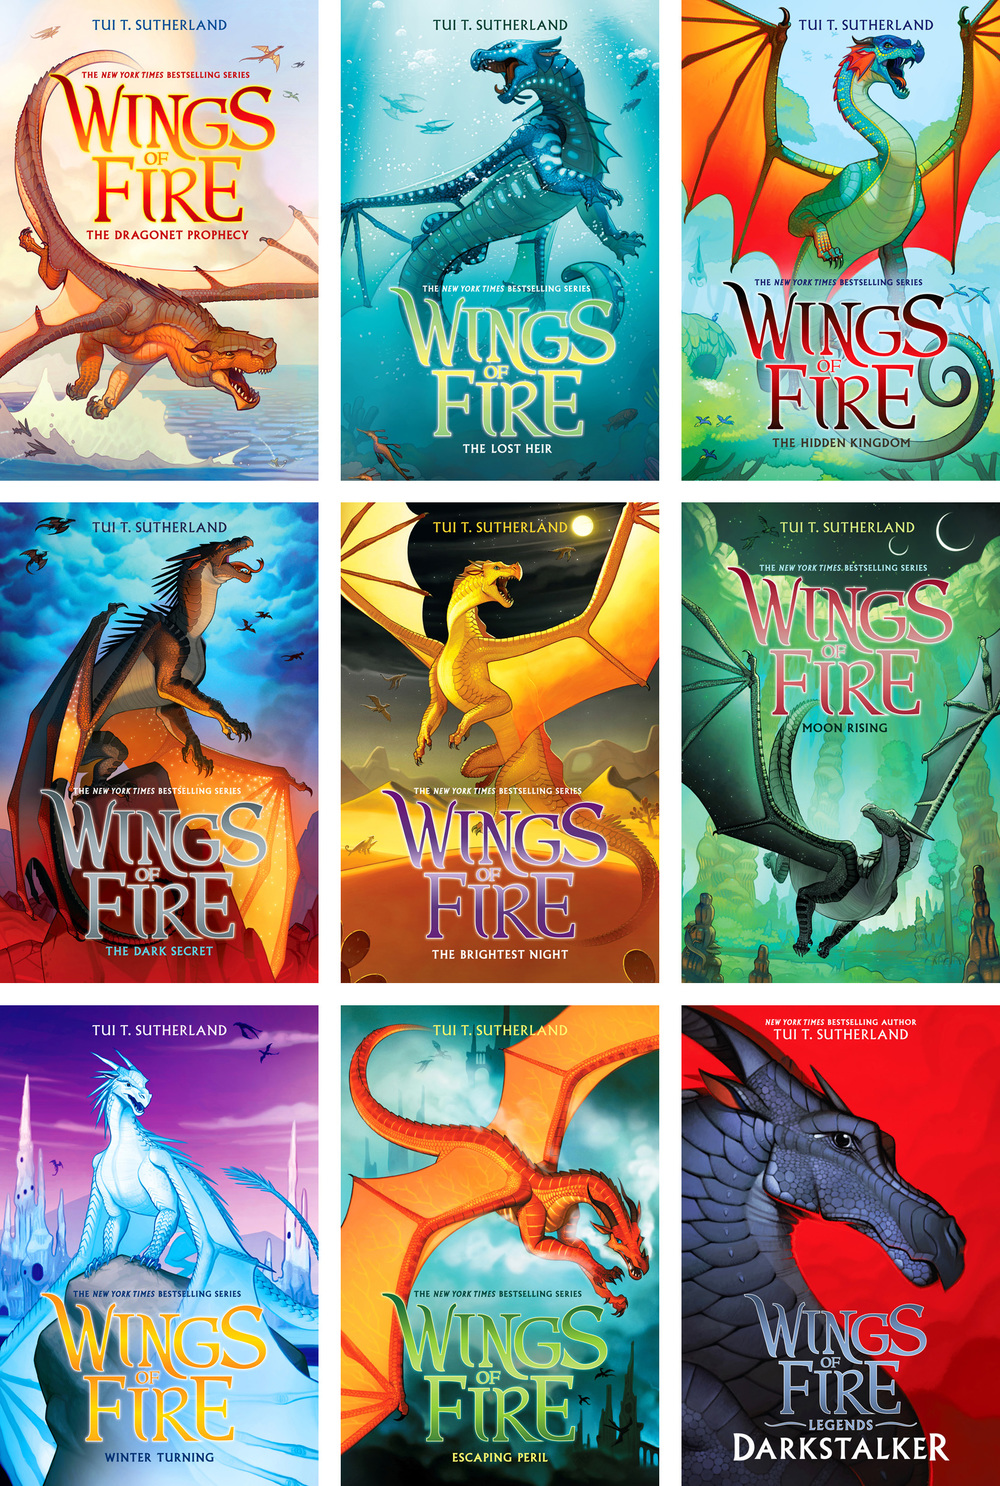 how many copies of wings of fire books are there